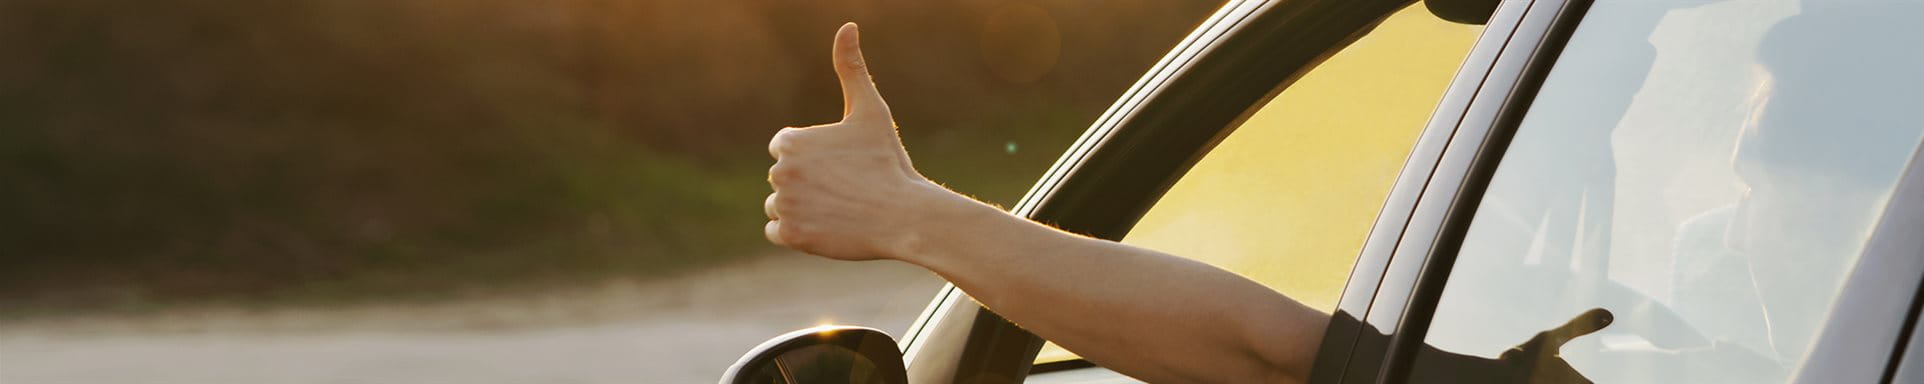 Thumb up from car window